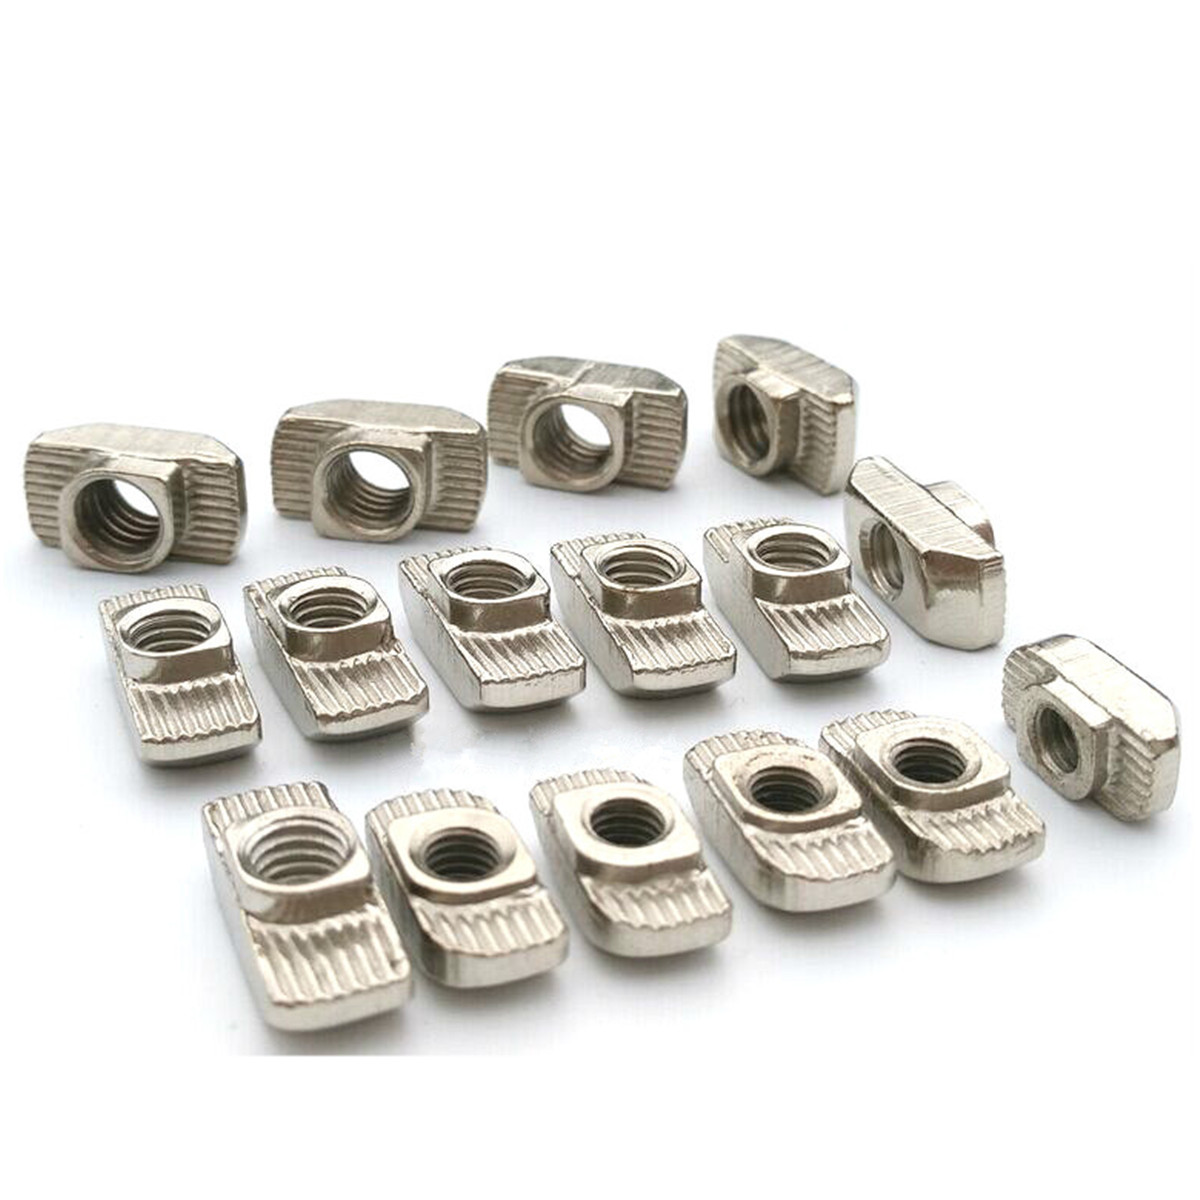 10x 4040 Series Aluminum Profiles Extrusion T Slot Nuts M6 Drop in T-Nuts New